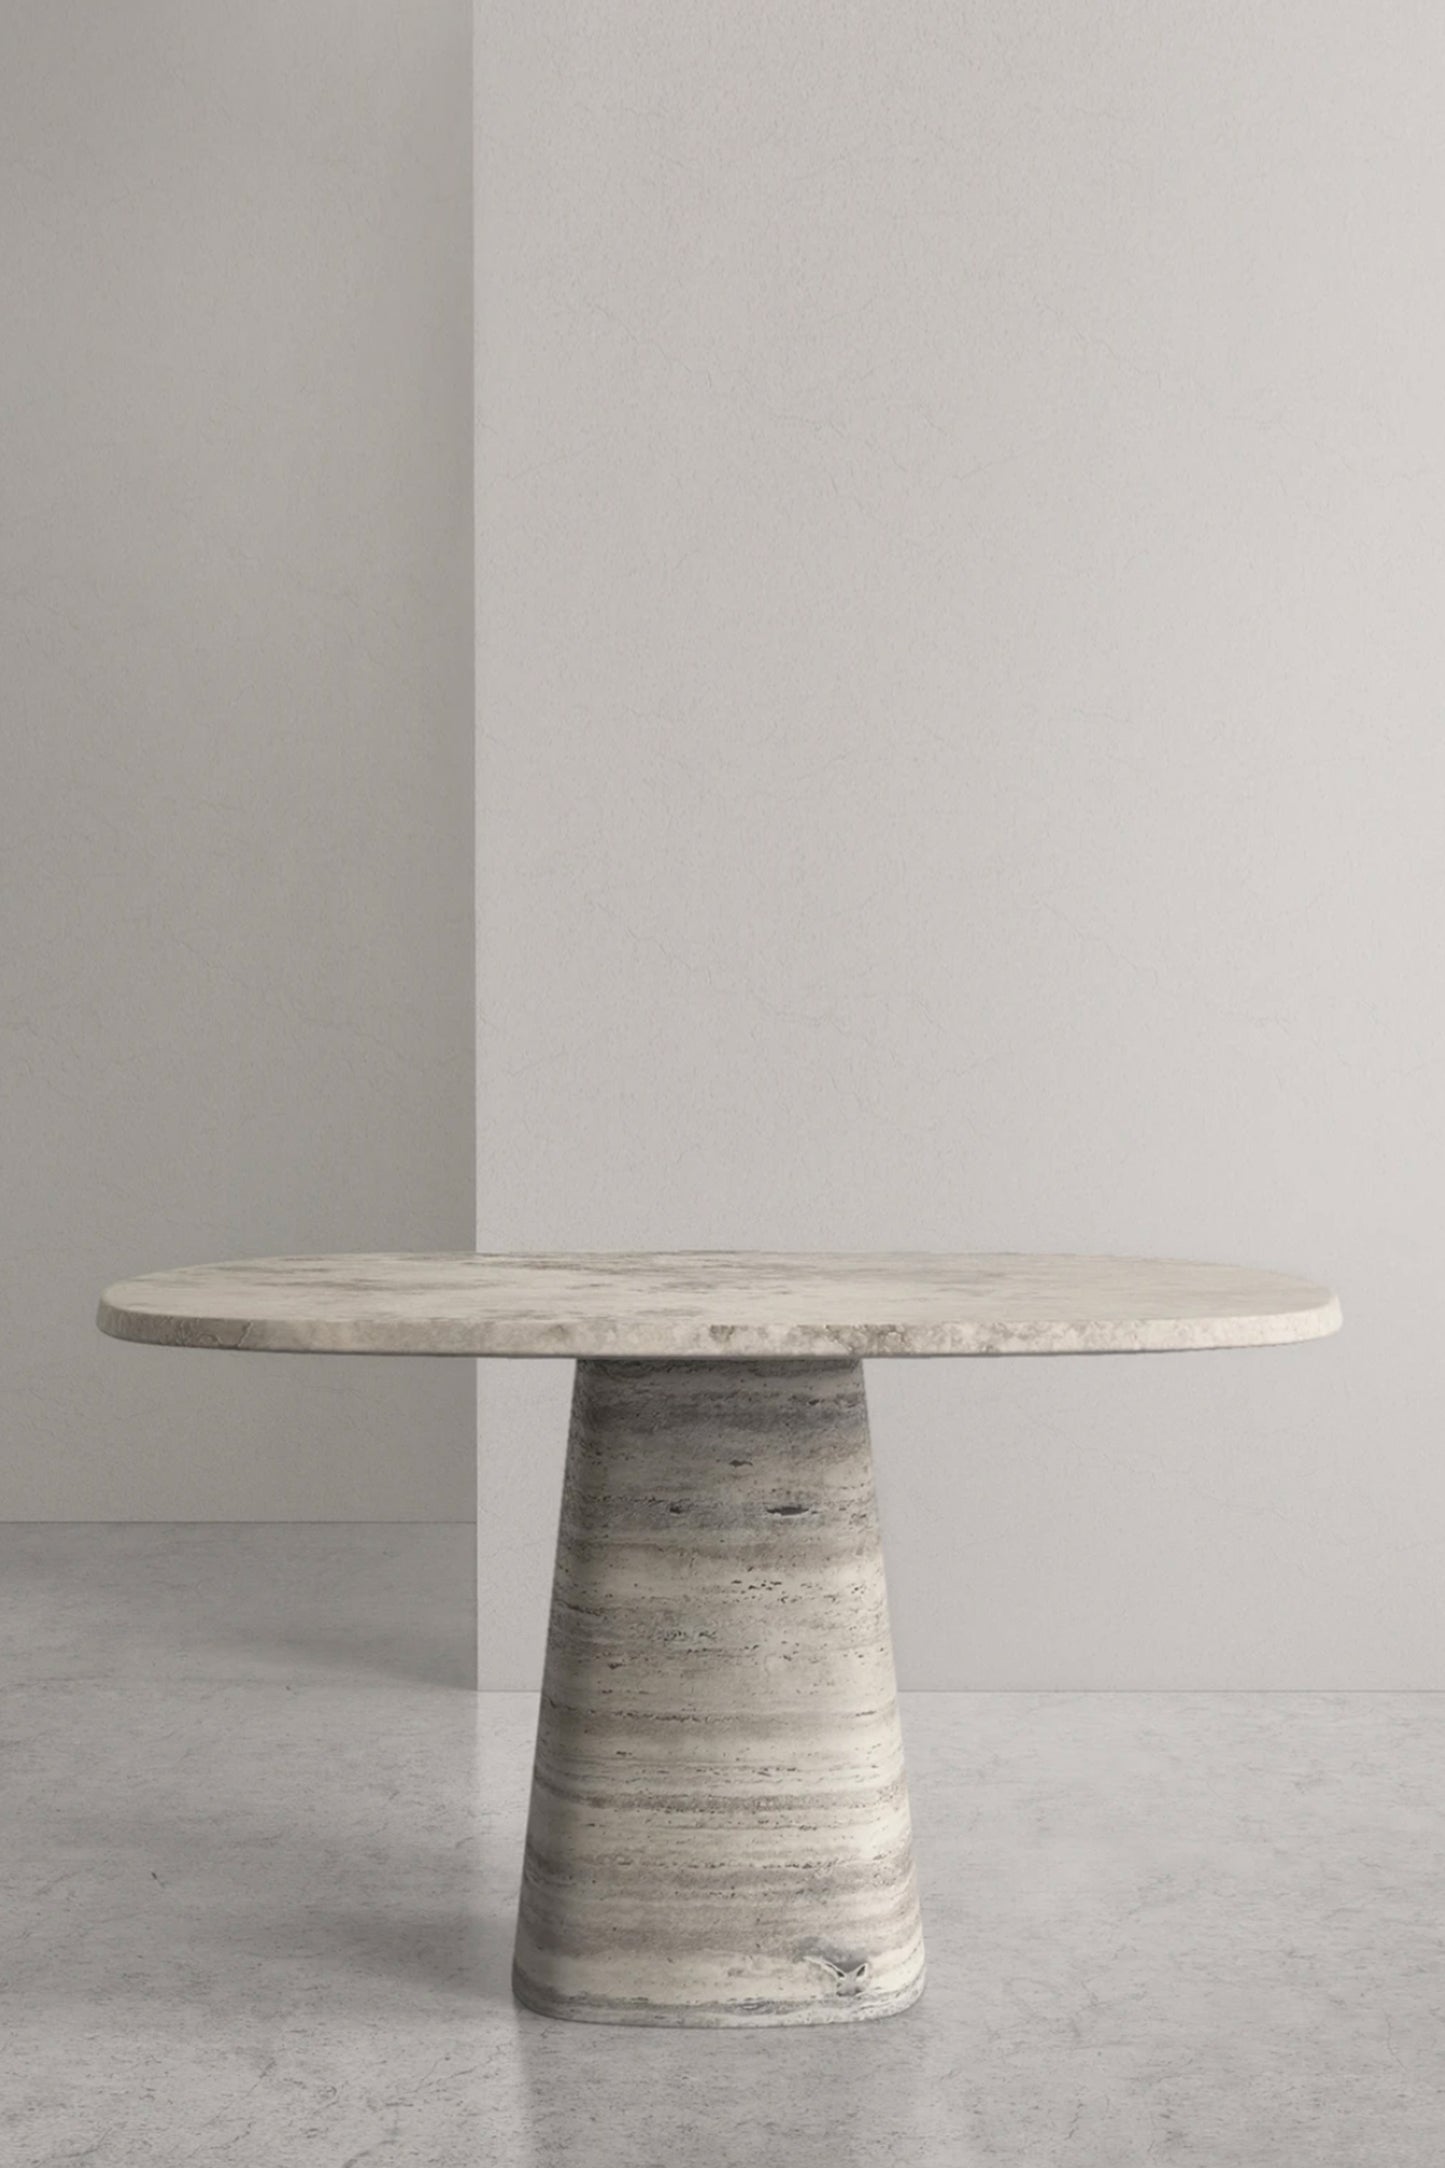 Wedge Table